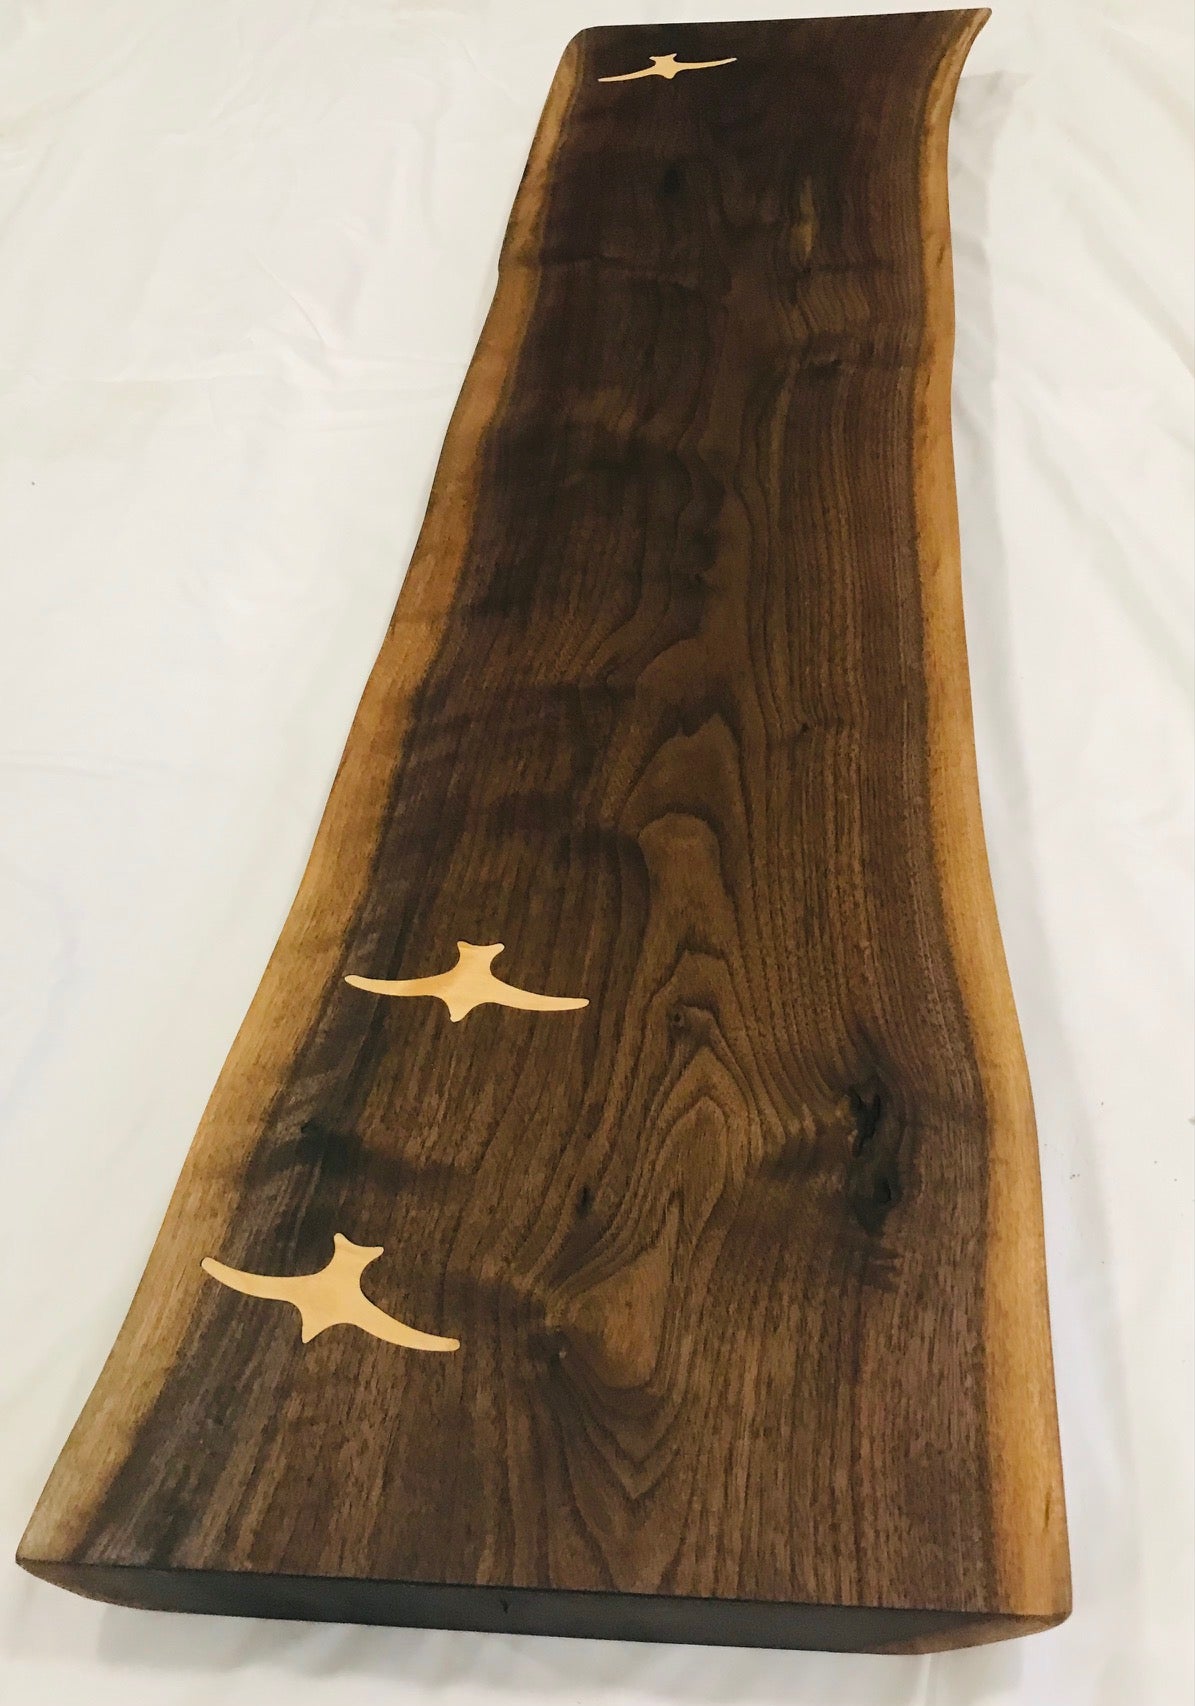 Live Edge Table - walnut Console OR Bench with Maple Seabird Inlay